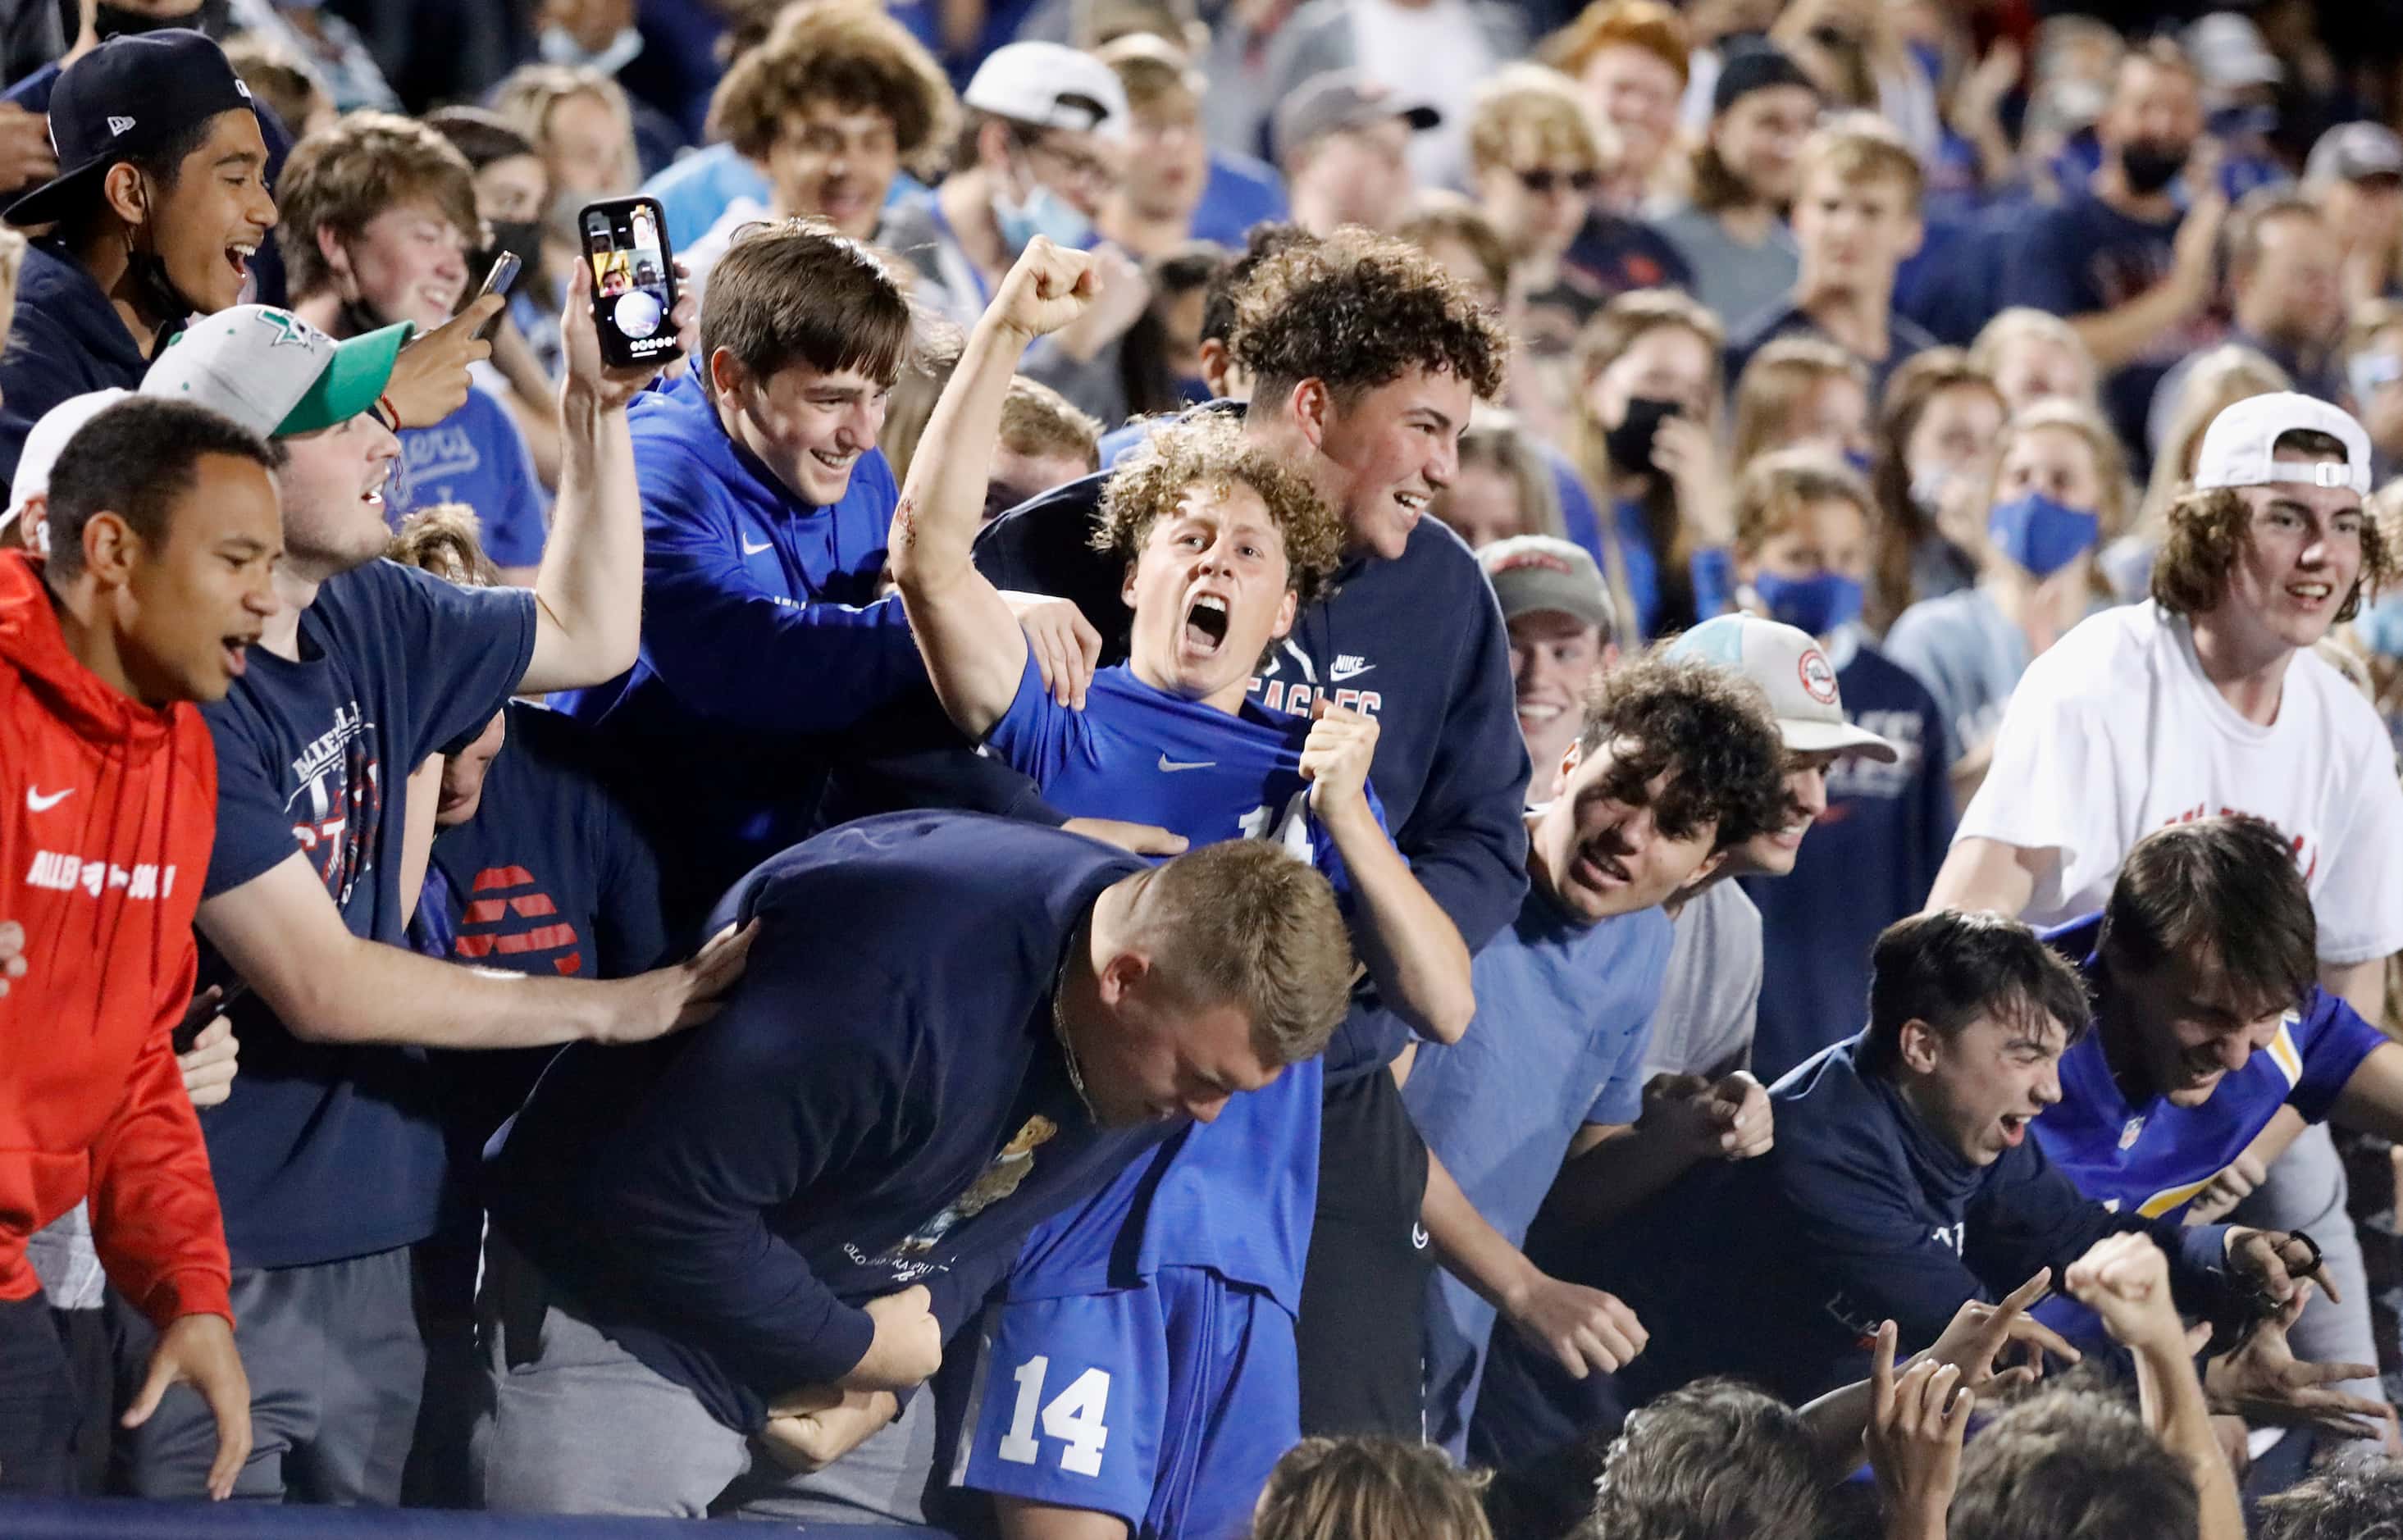 Allen forward Matthew Sanchez (14) leaps into the student section to celebrate making his...